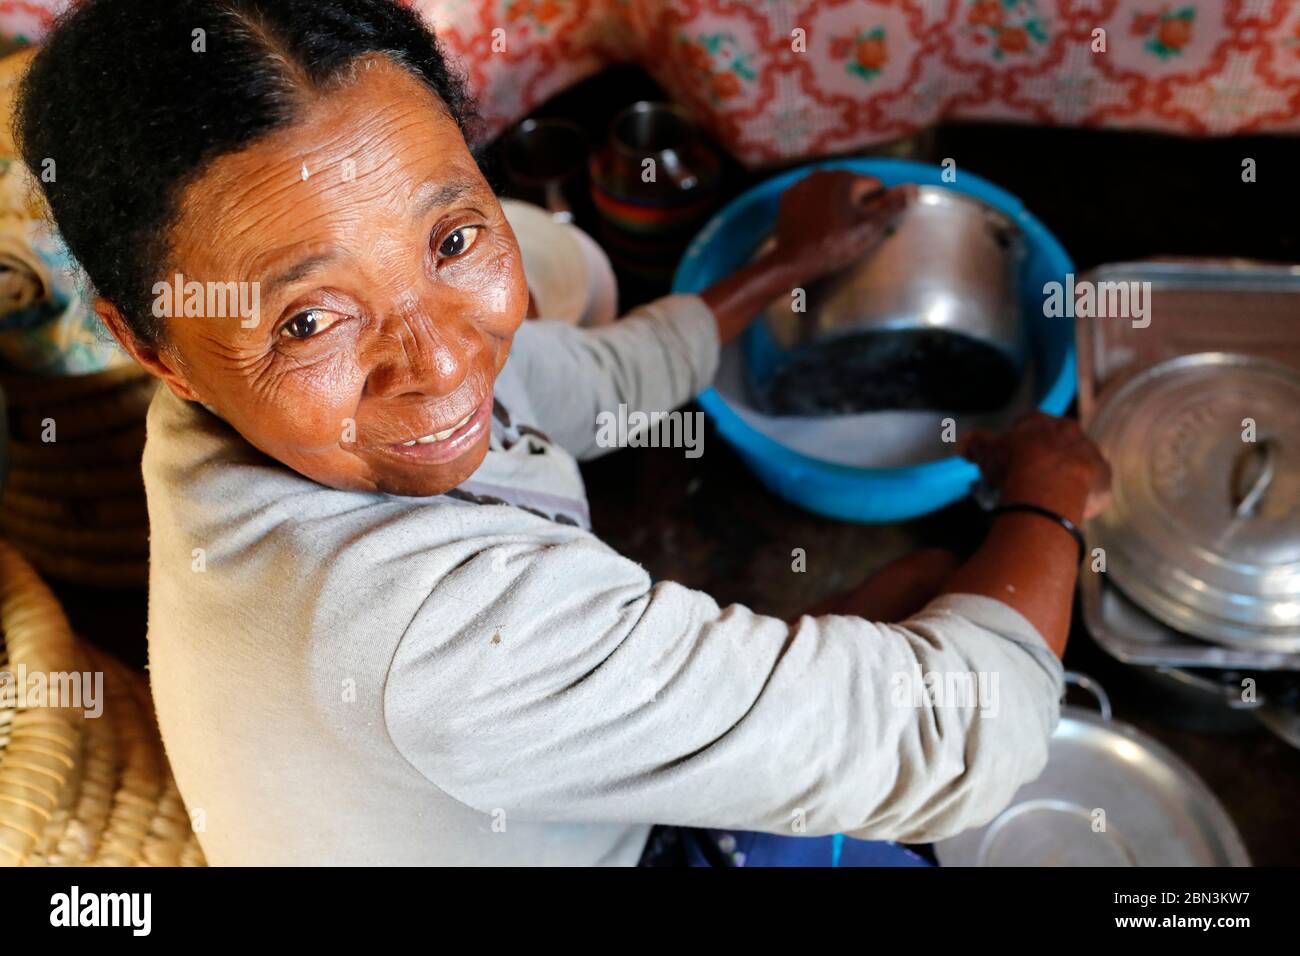 Malagasy woman working in kitchen.  Portrait.  Madagascar. Stock Photo